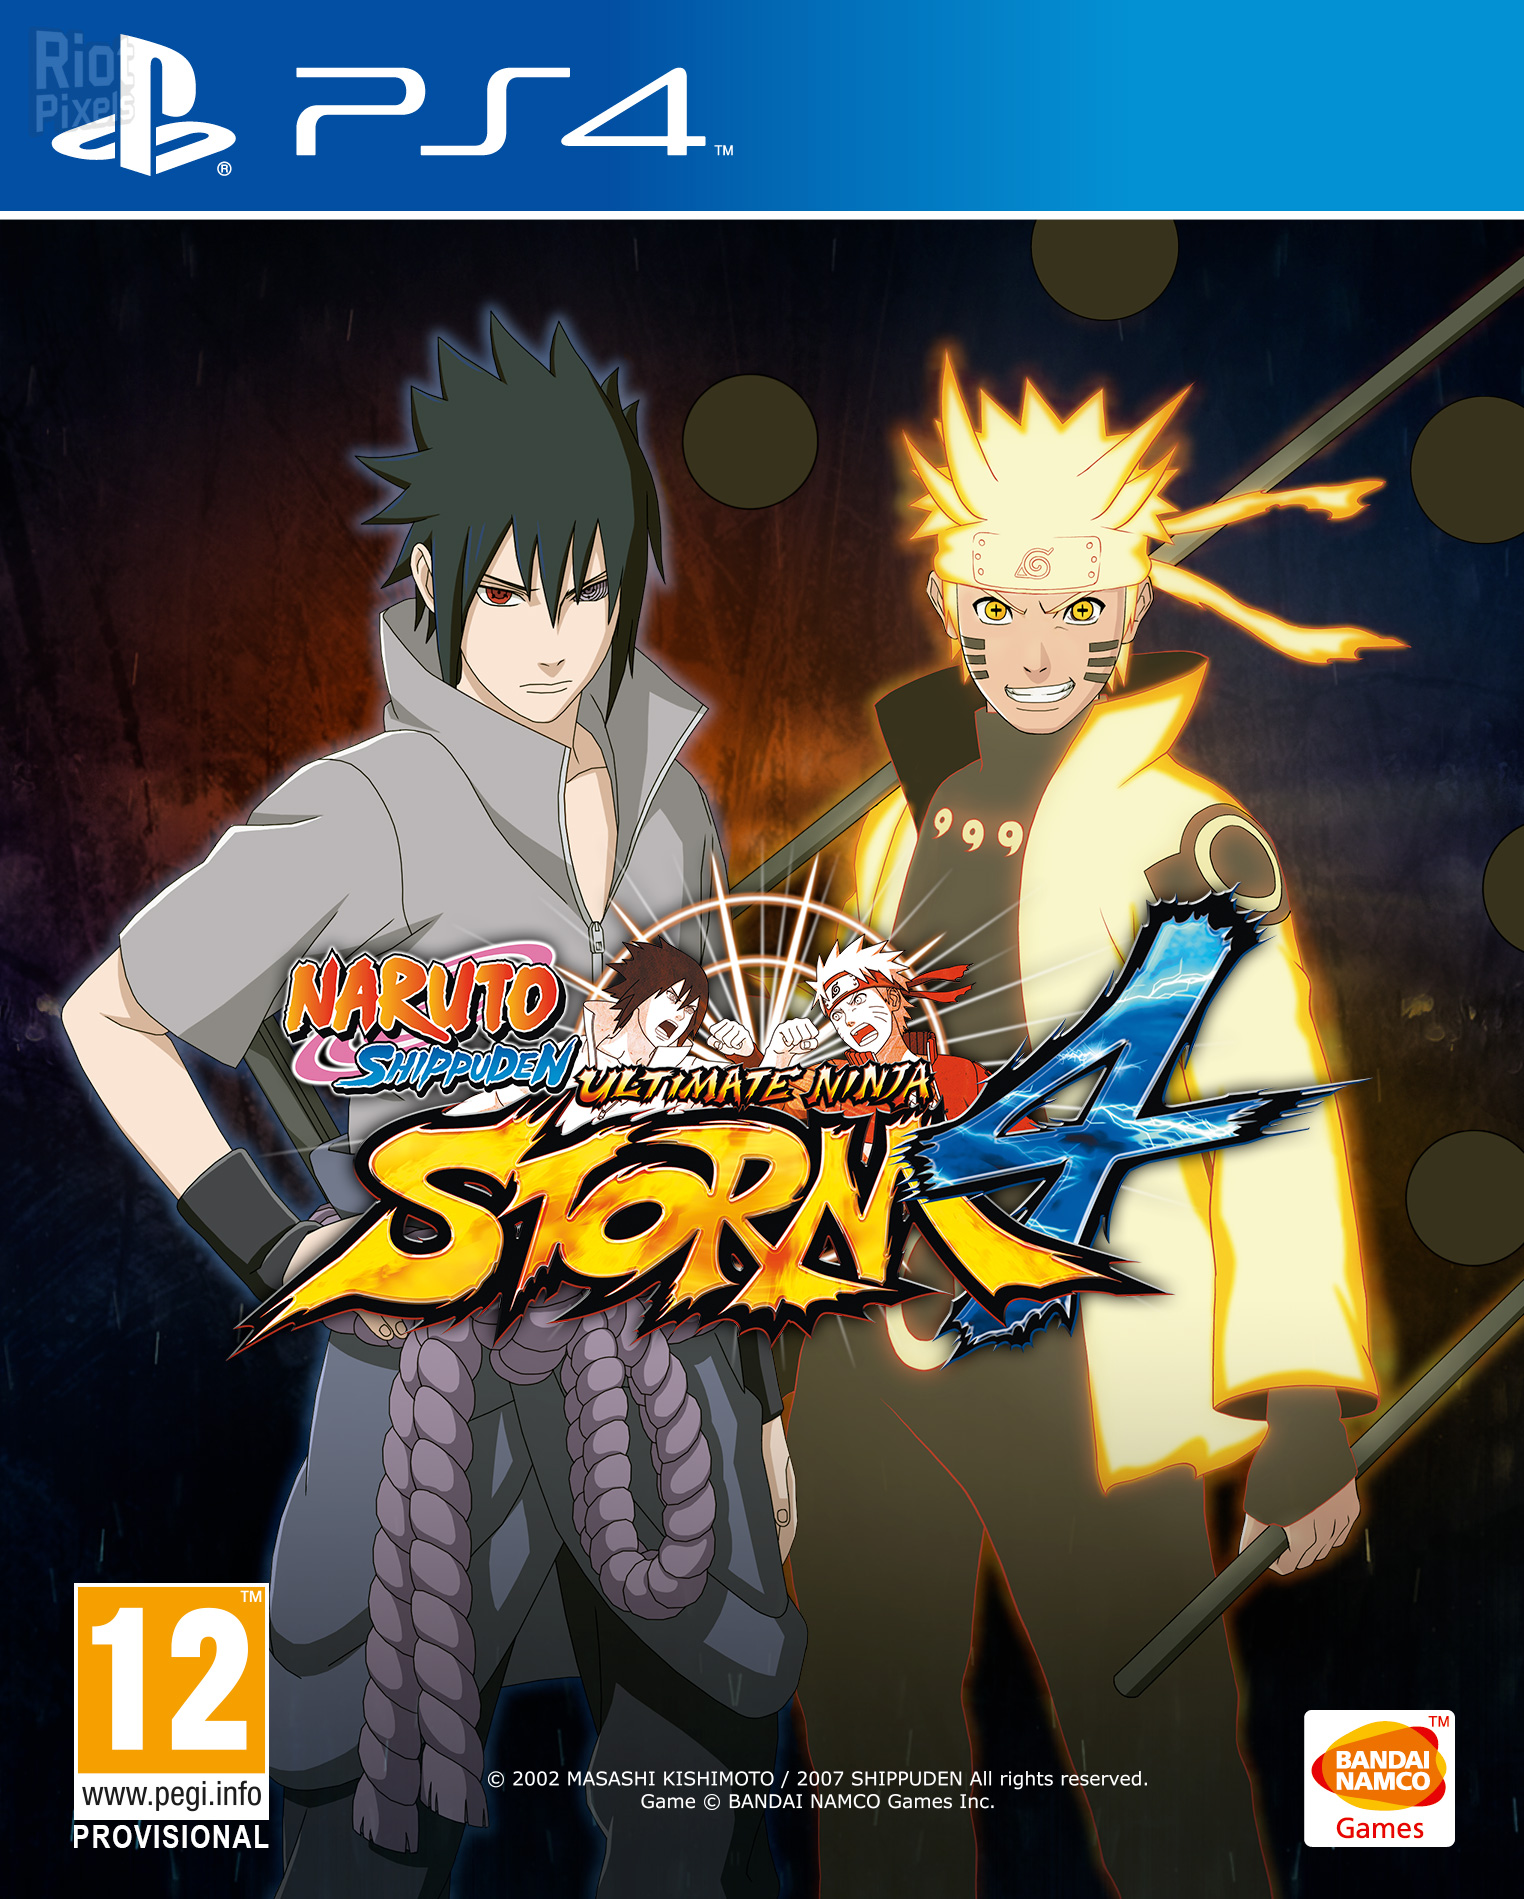 Listing Outs June 17 EU Release for 3DS Naruto Shippuden